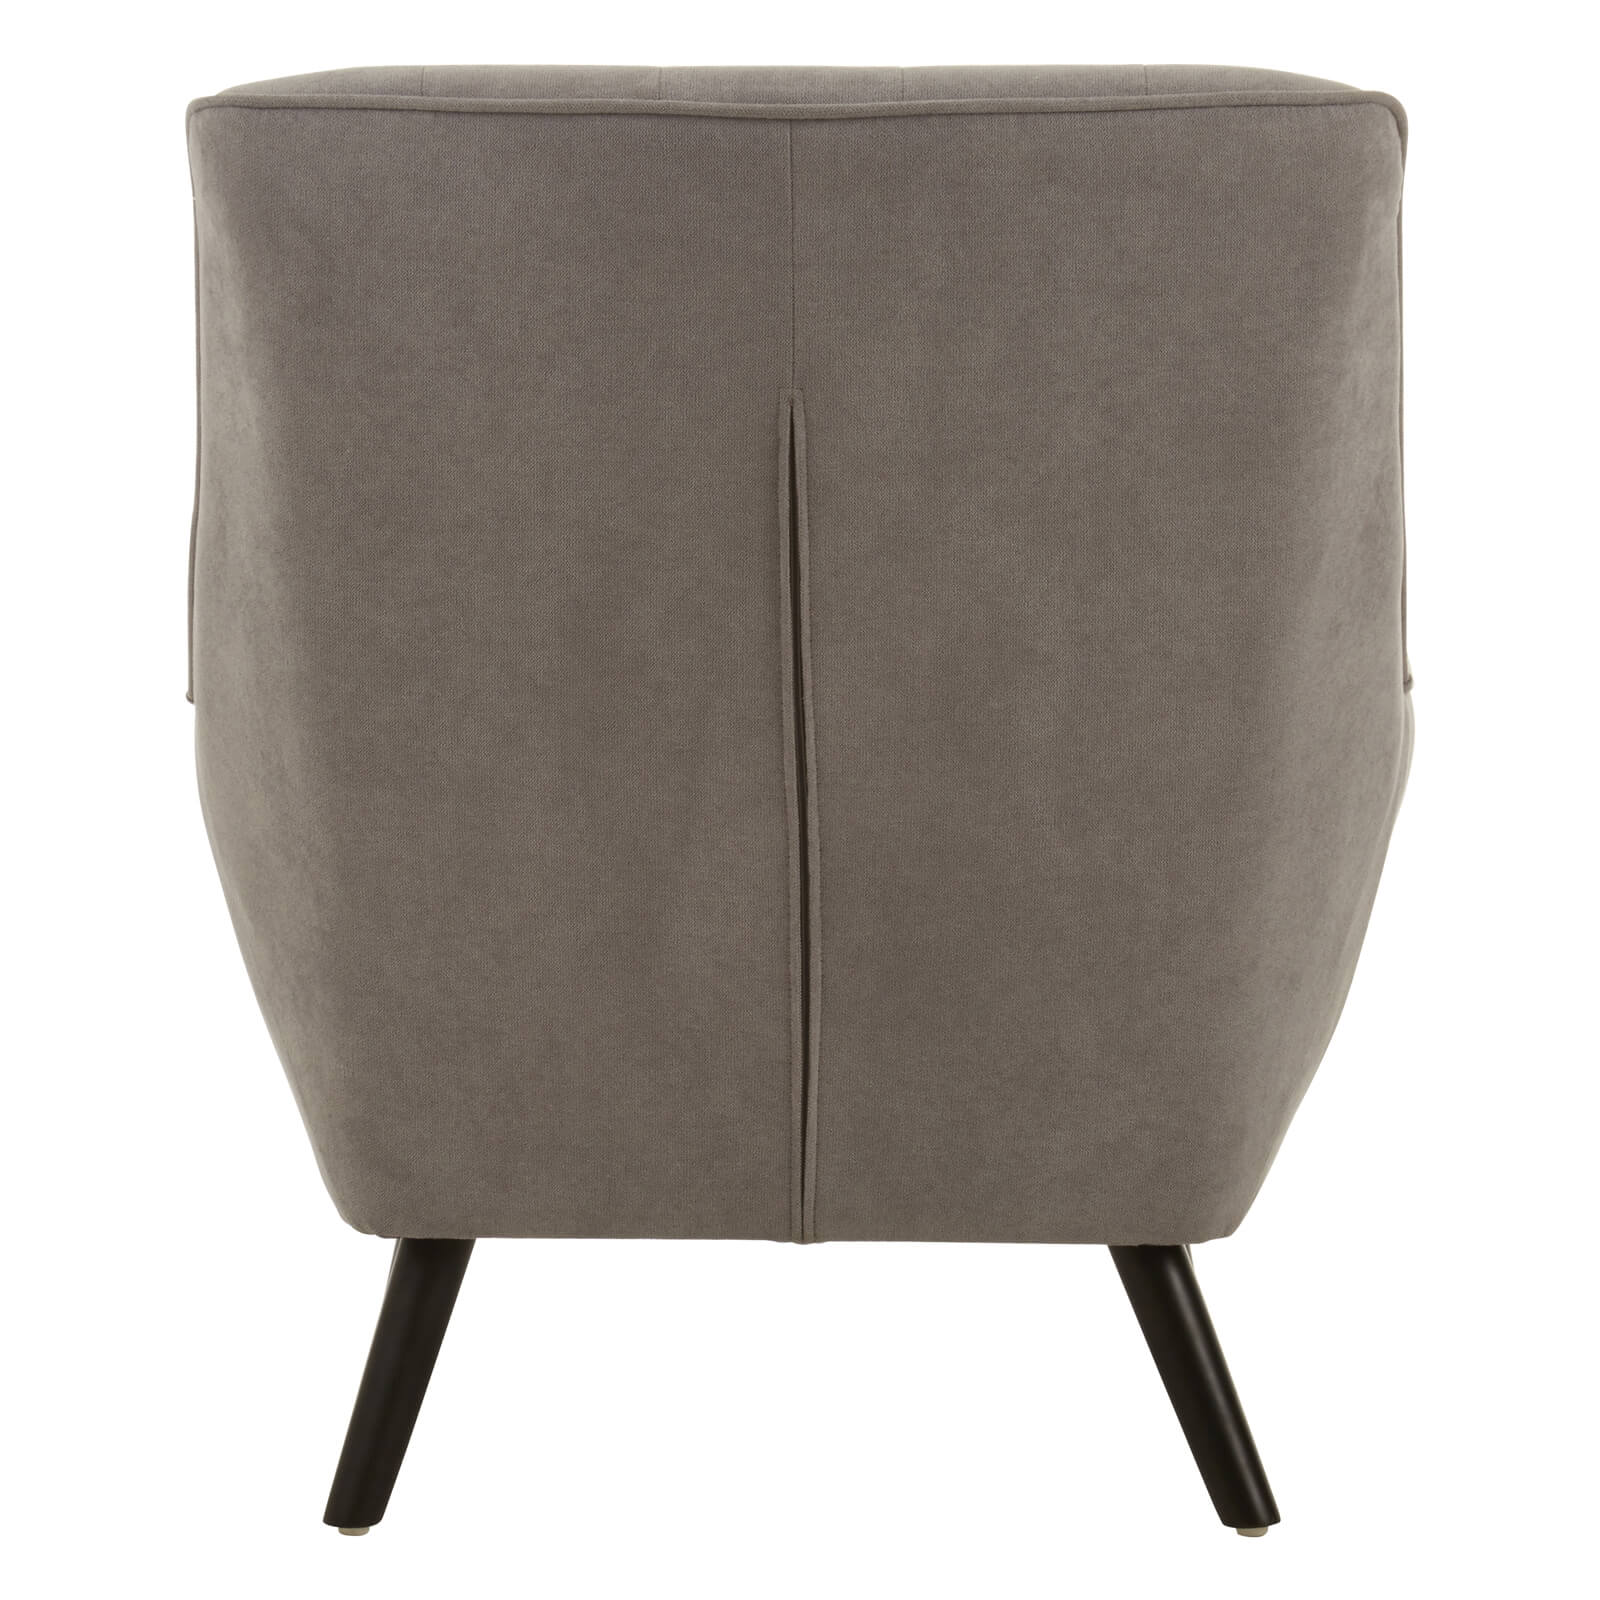 Stockholm Curved Chair - Grey